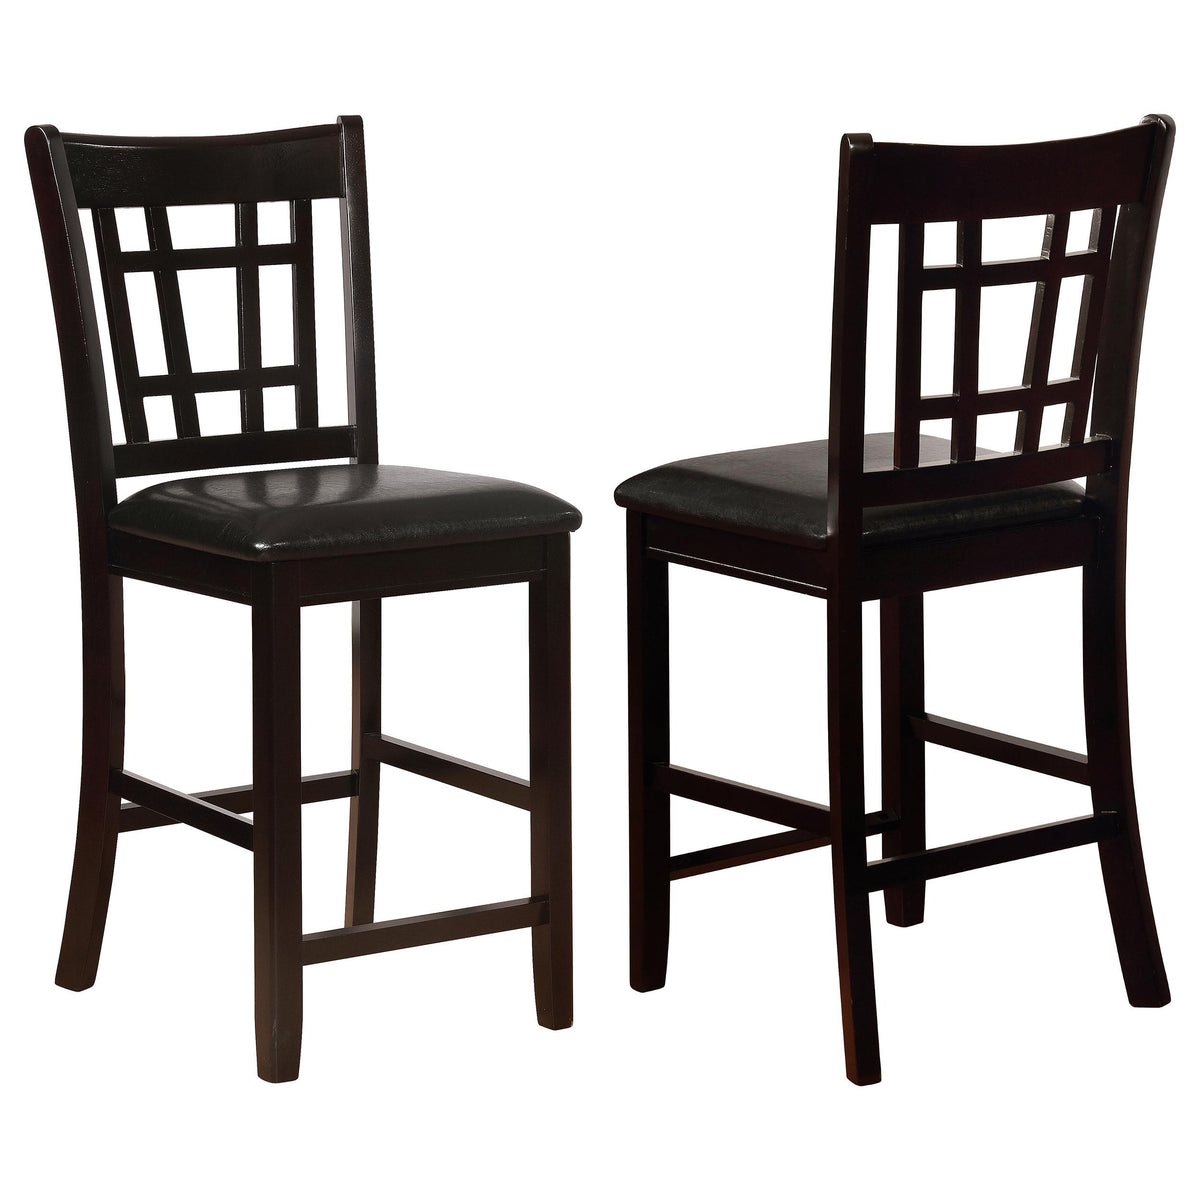 Lavon Upholstered Counter Height Stools Black and Espresso (Set of 2)  Half Price Furniture